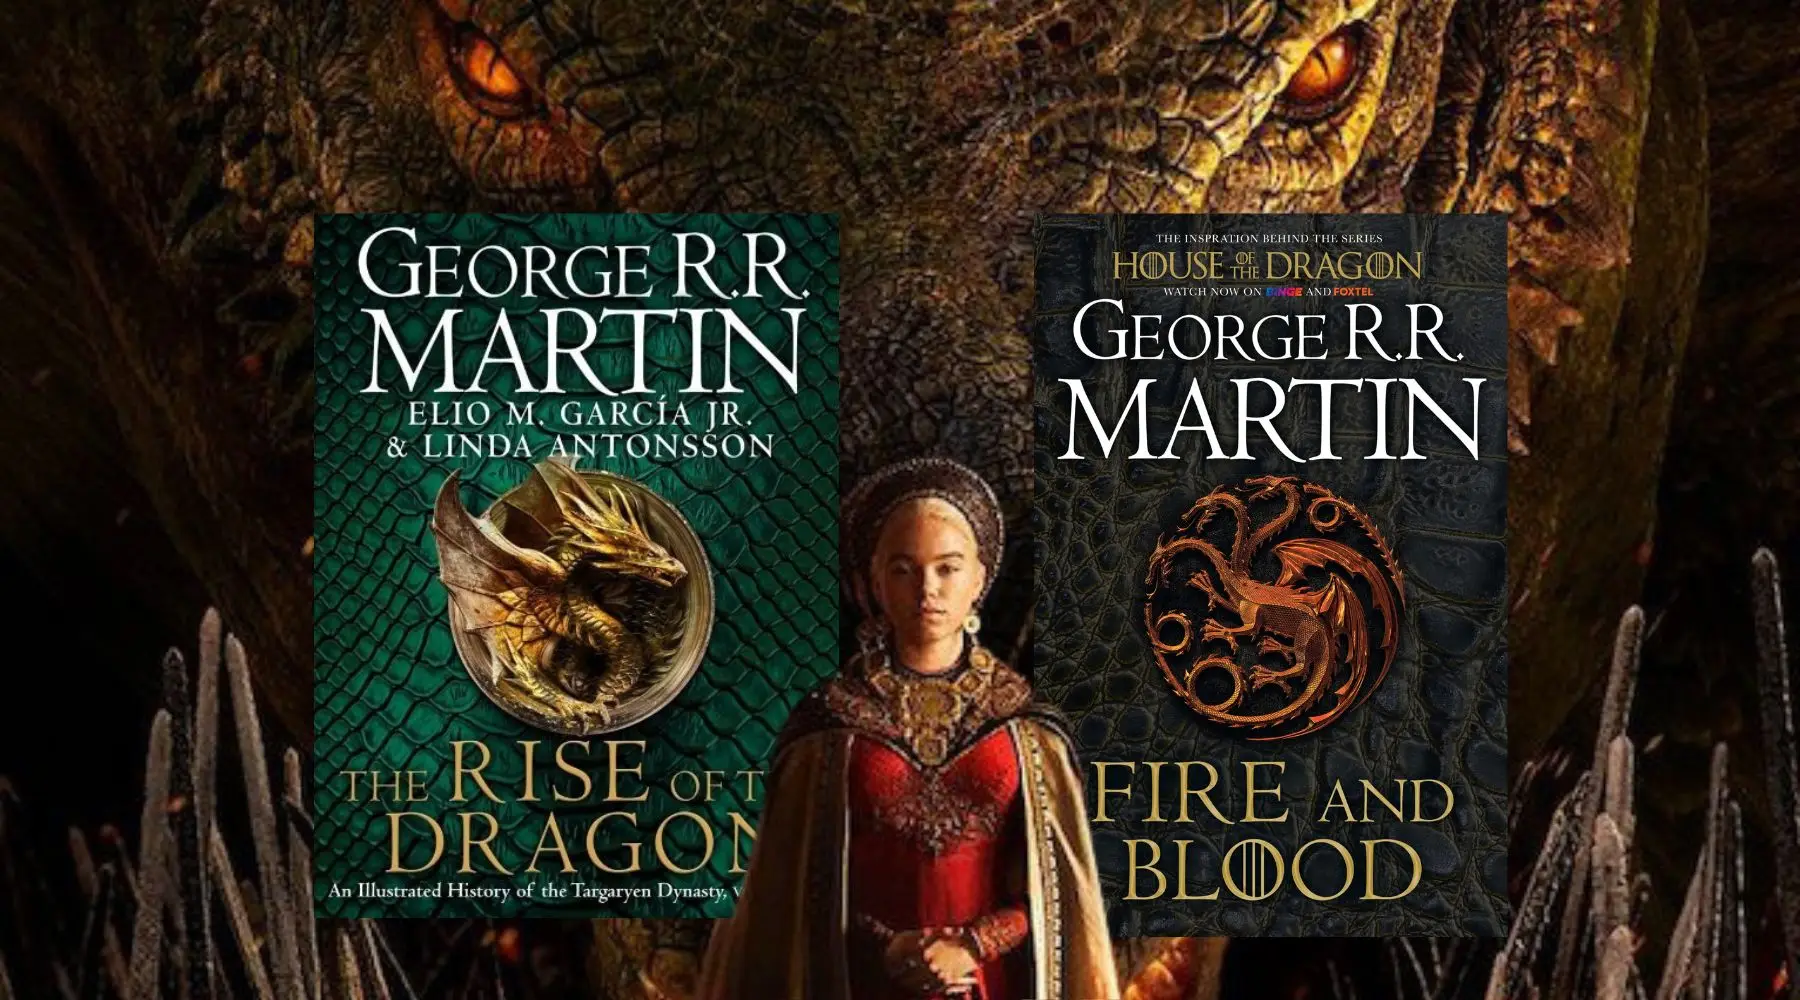 Fire and Blood: The inspiration for HBO’s House of the Dragon (A Song of  Ice and Fire)